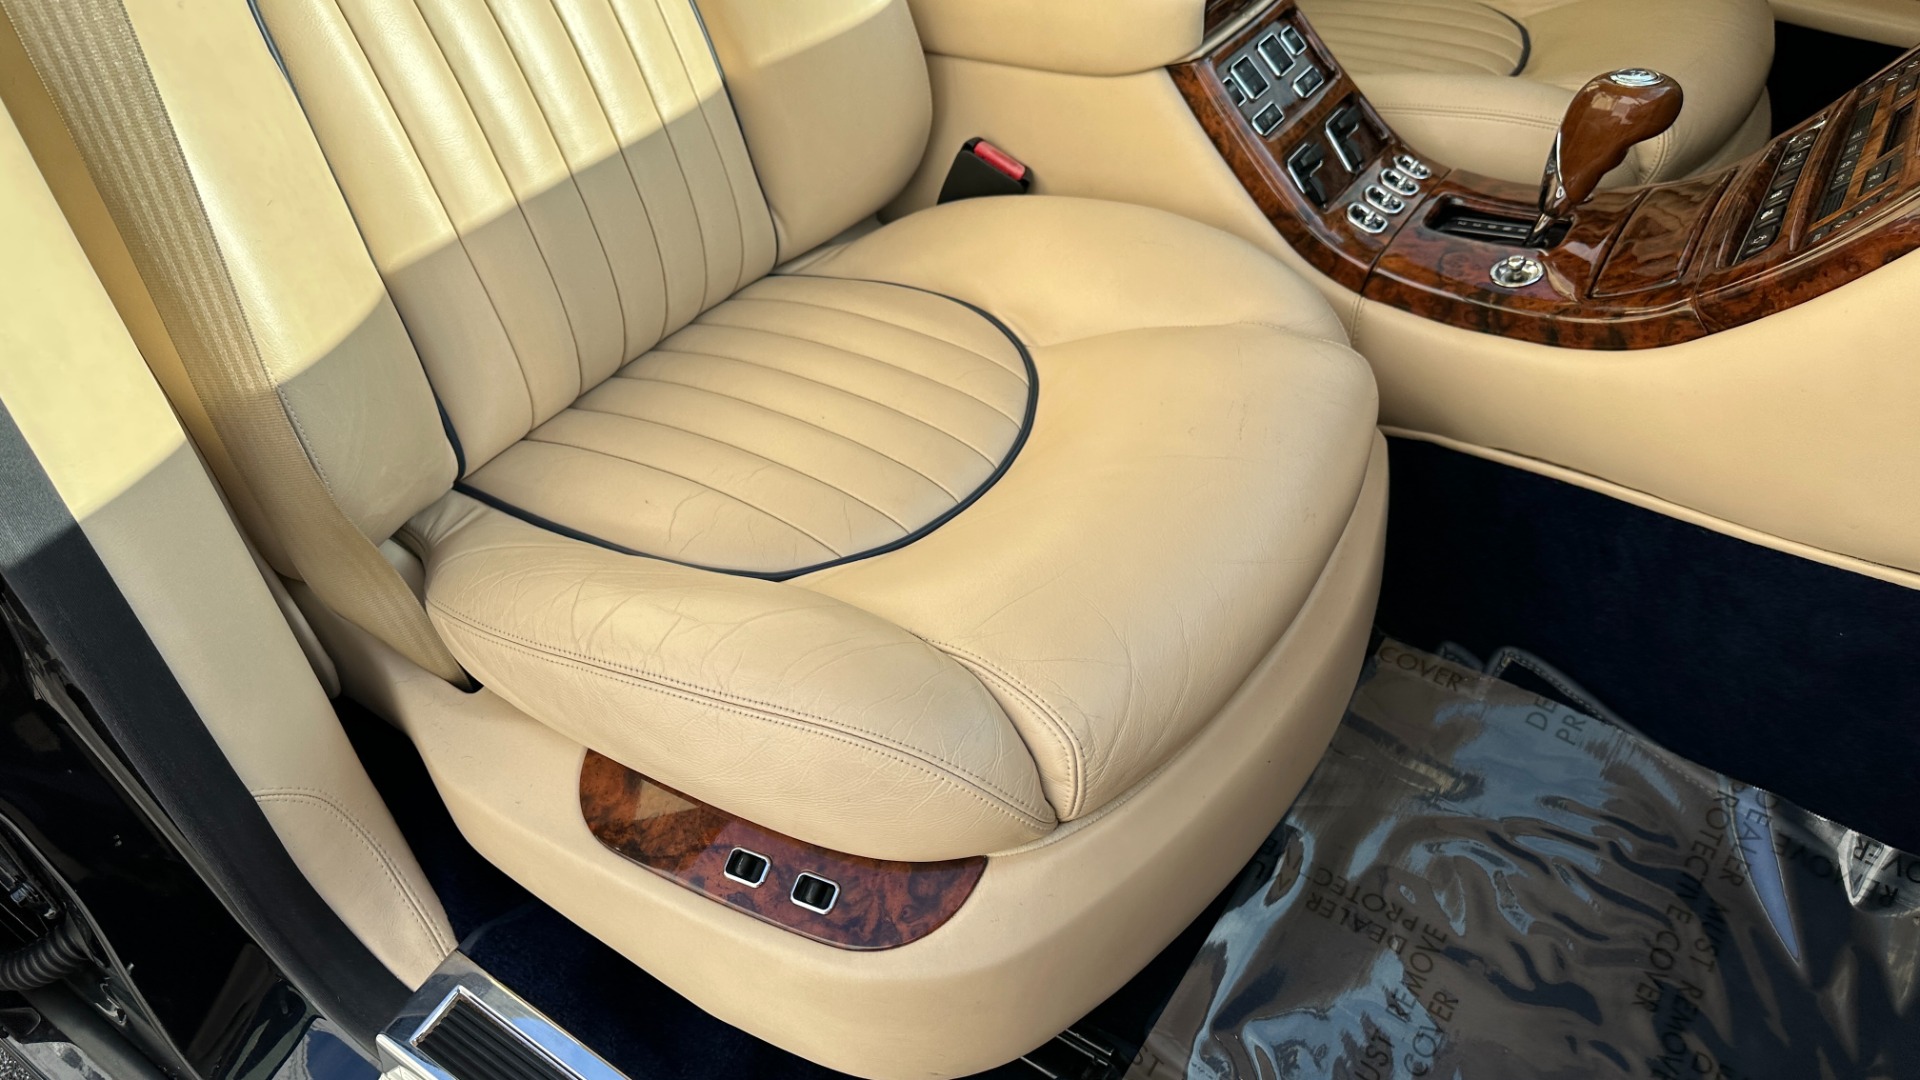 Used 2001 Bentley ARNAGE RED LABEL 6.75L V8 / TURBO / FULL LEATHER / WOOD TRIM / HEATED SEATS / SUNR for sale $26,999 at Formula Imports in Charlotte NC 28227 14